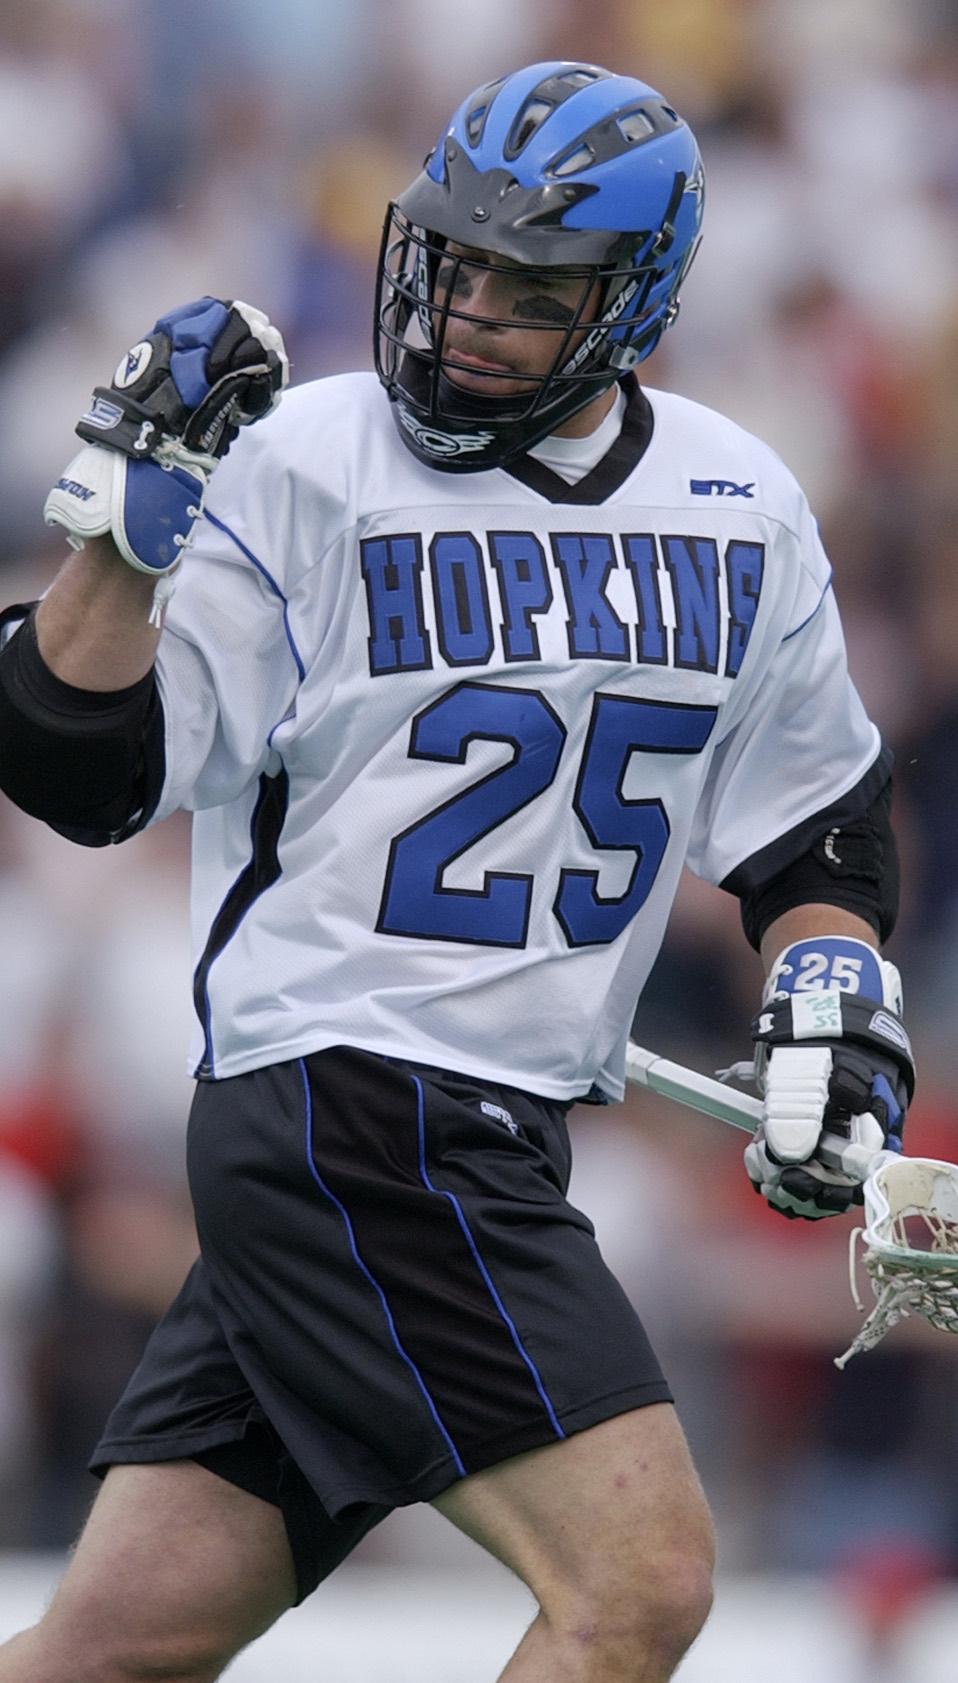 While there have been numerous players since 1922 who have enjoyed outstanding careers at Hopkins, only 20 players have earned All-America honors four times.